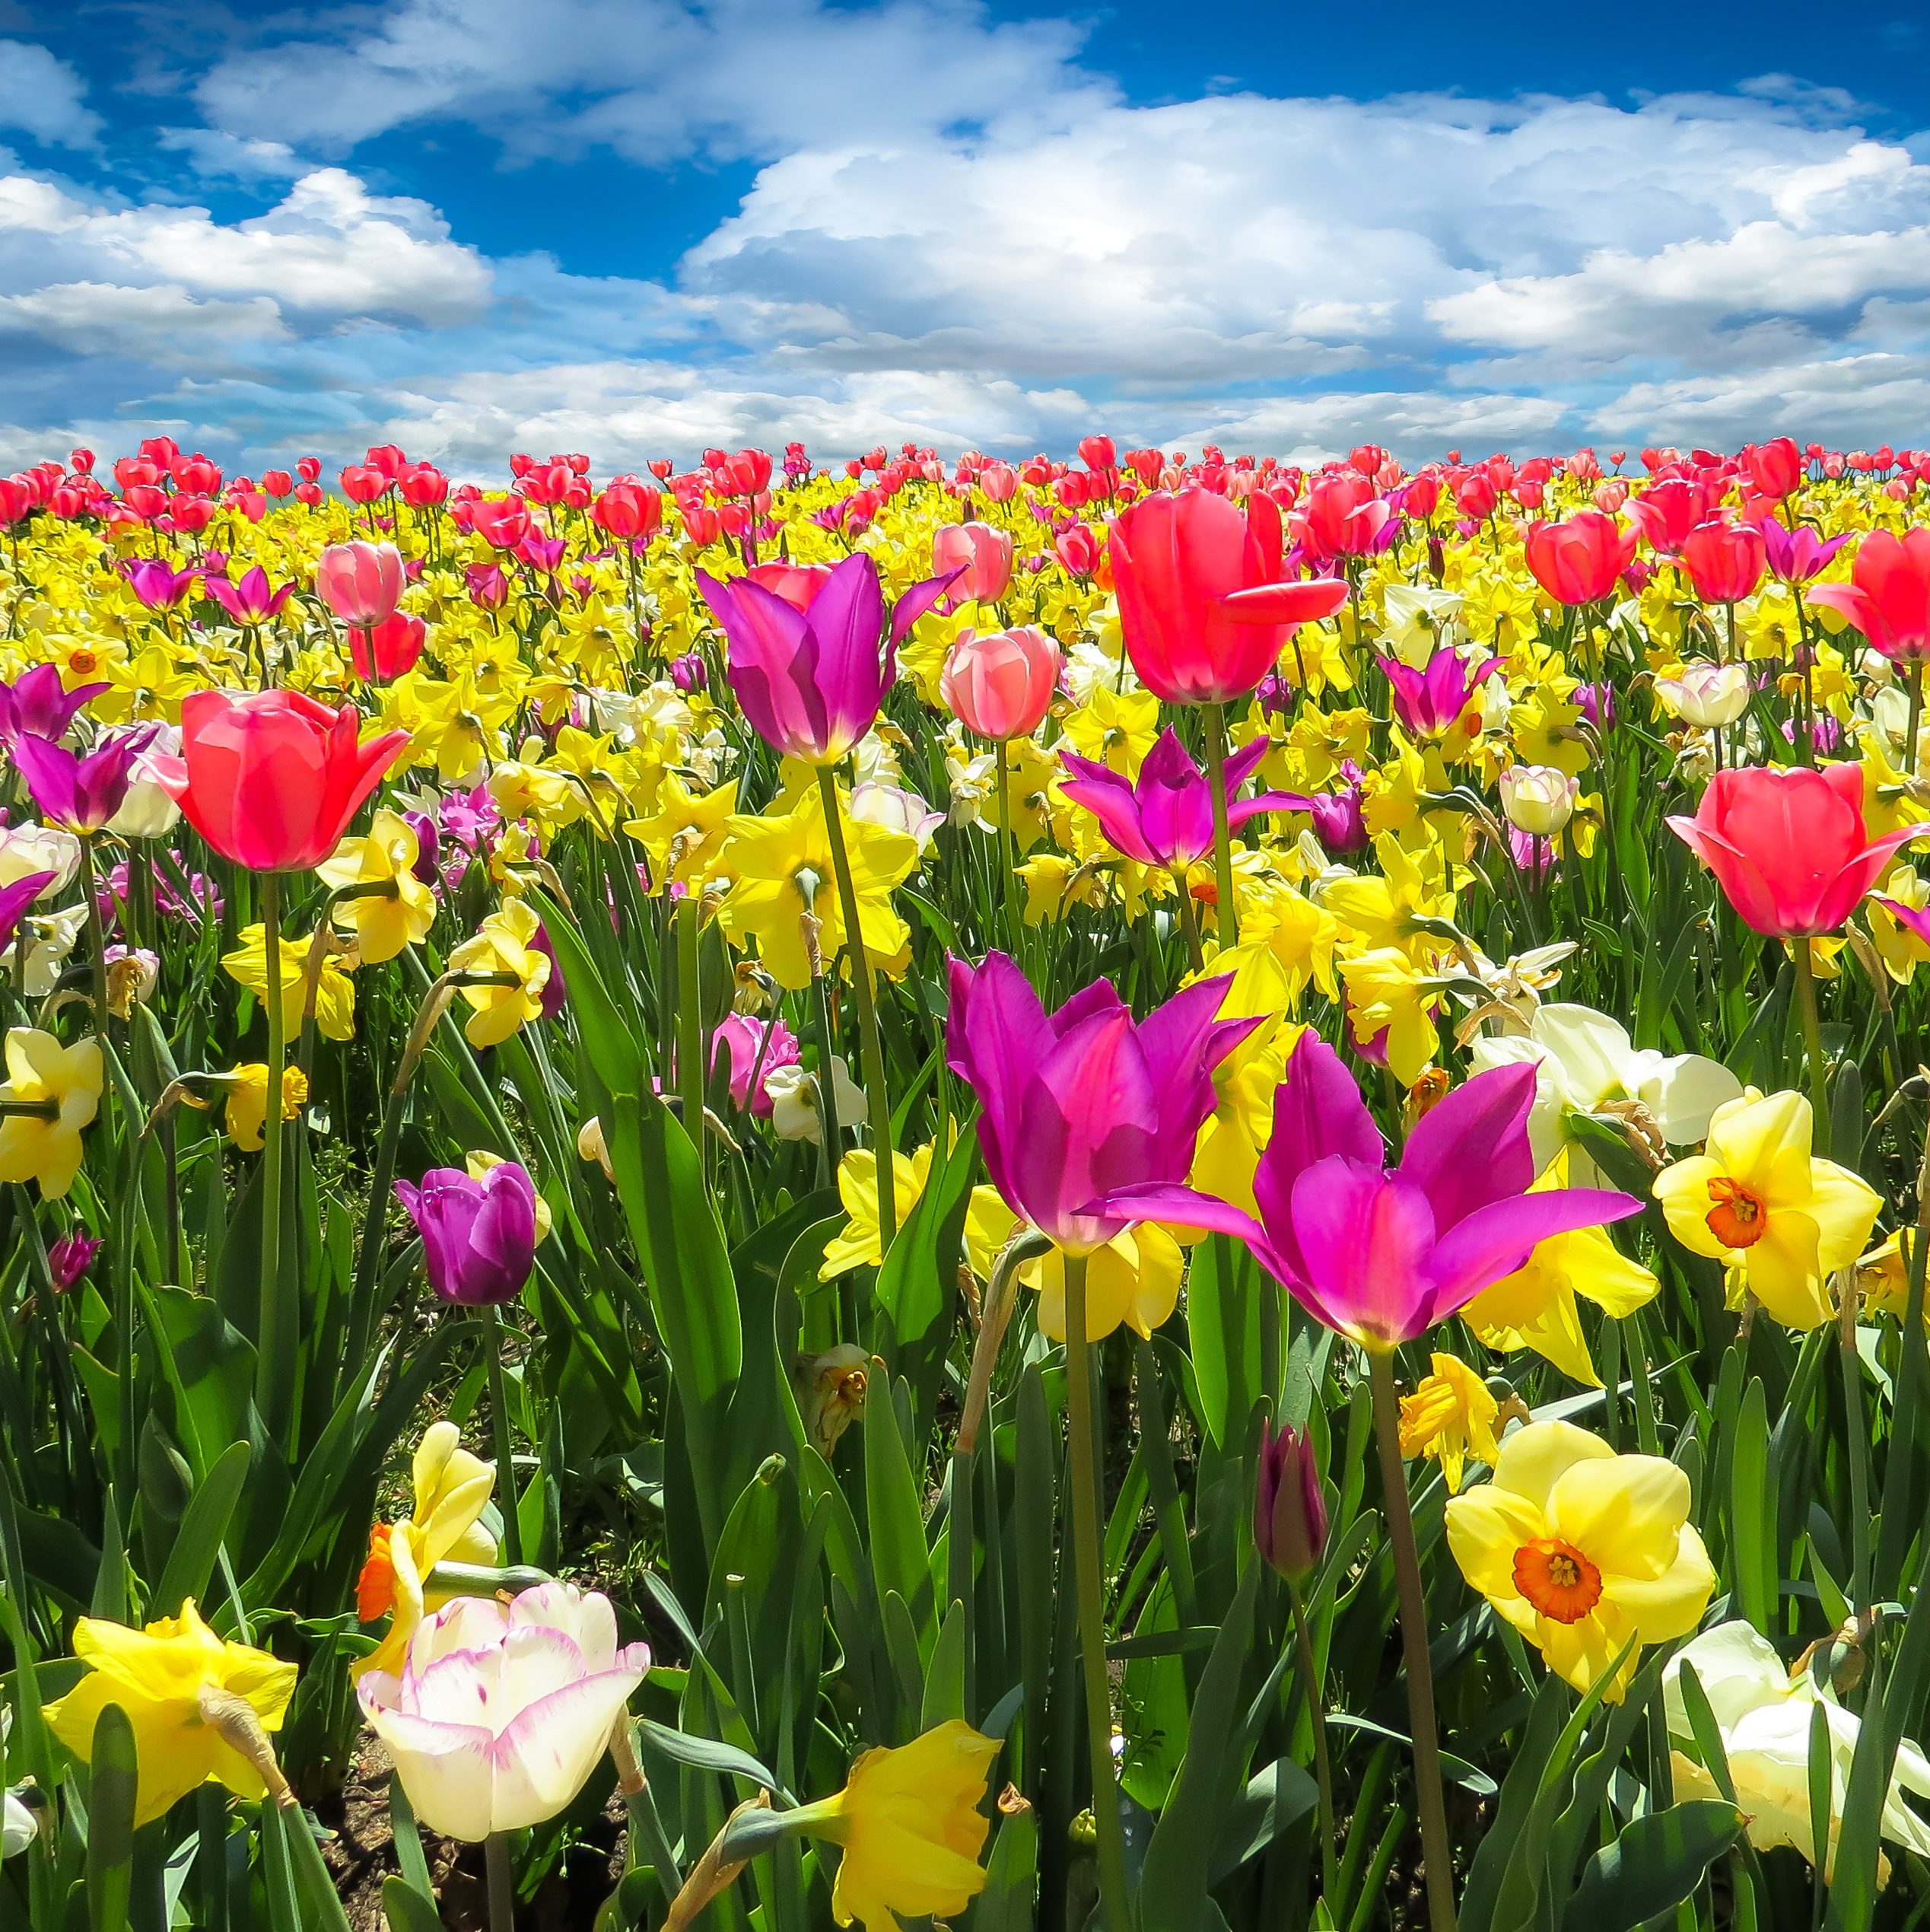 A photograph of a brightly coloured meadow of flowers.